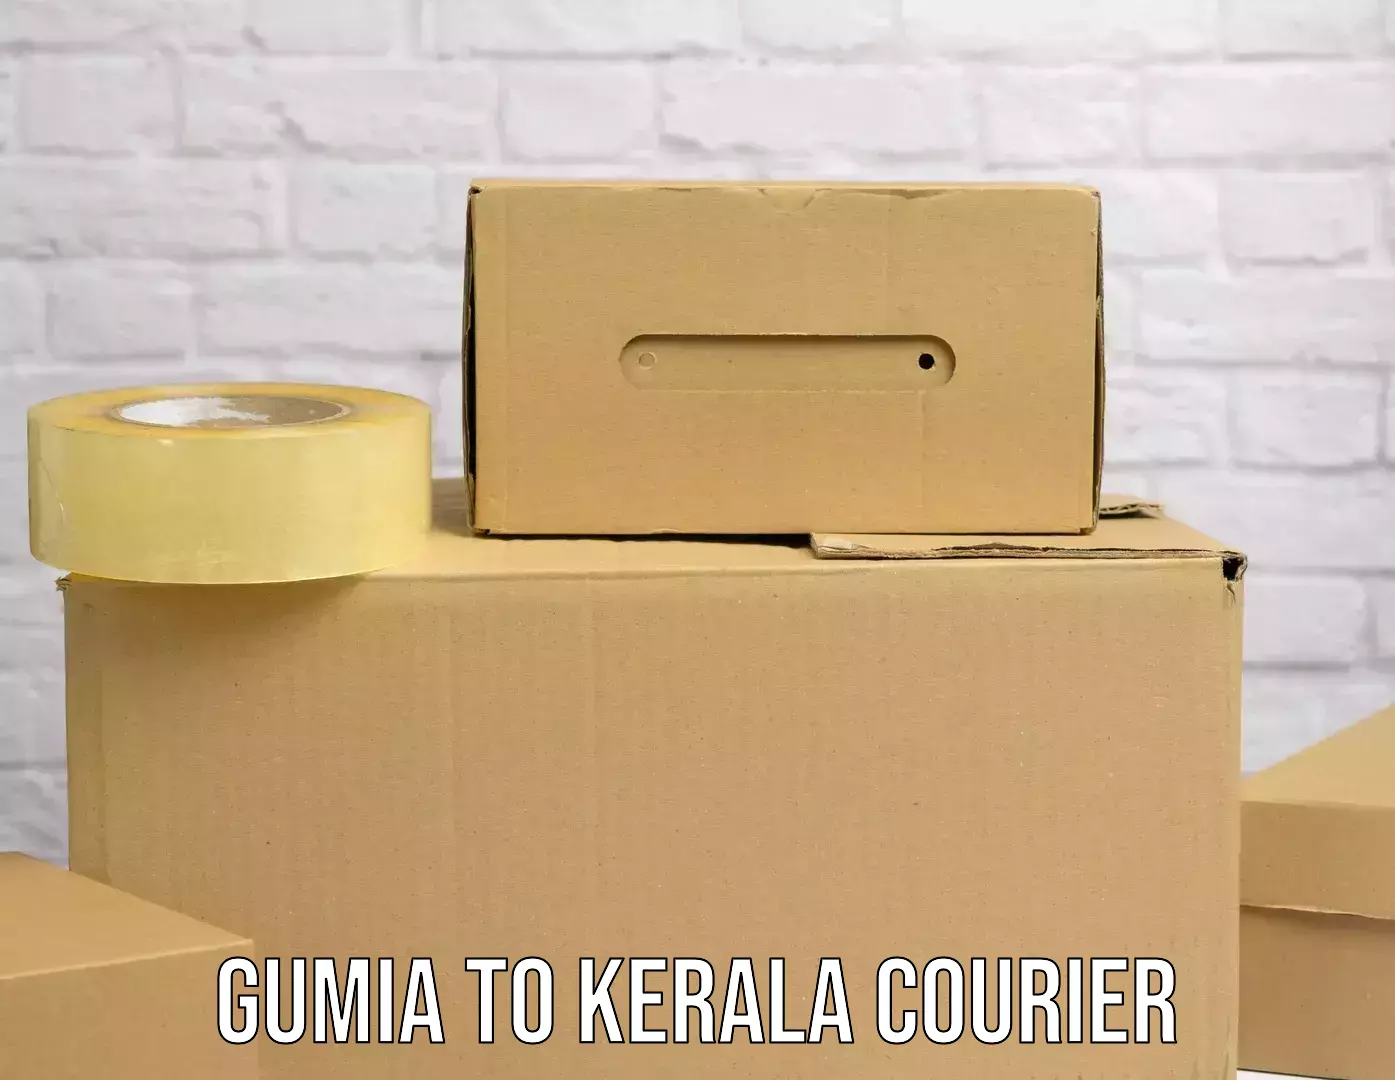 Same-day delivery solutions Gumia to Thiruvananthapuram